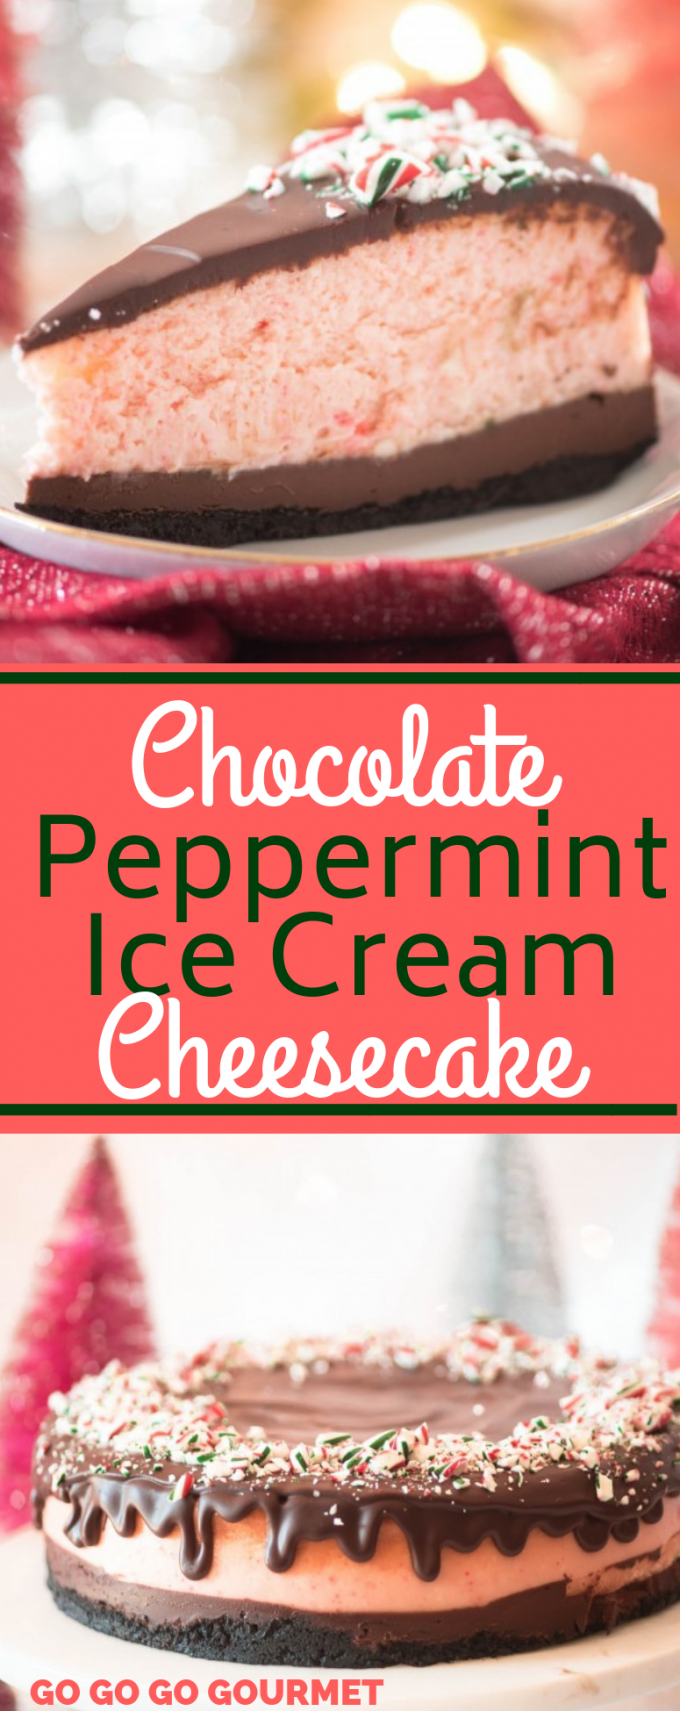 This Chocolate Peppermint Ice Cream Cheesecake recipe is easy as pie! Made with plenty of chocolate ganache and Oreo cookies, this cheesecake makes a showstopping Christmas dessert! While it isn't no bake, it is definitely worth the little bit of extra work! #gogogogourmet #chocolatepeppermintcheesecake #peppermintcheesecake #christmasdesserts via @gogogogourmet